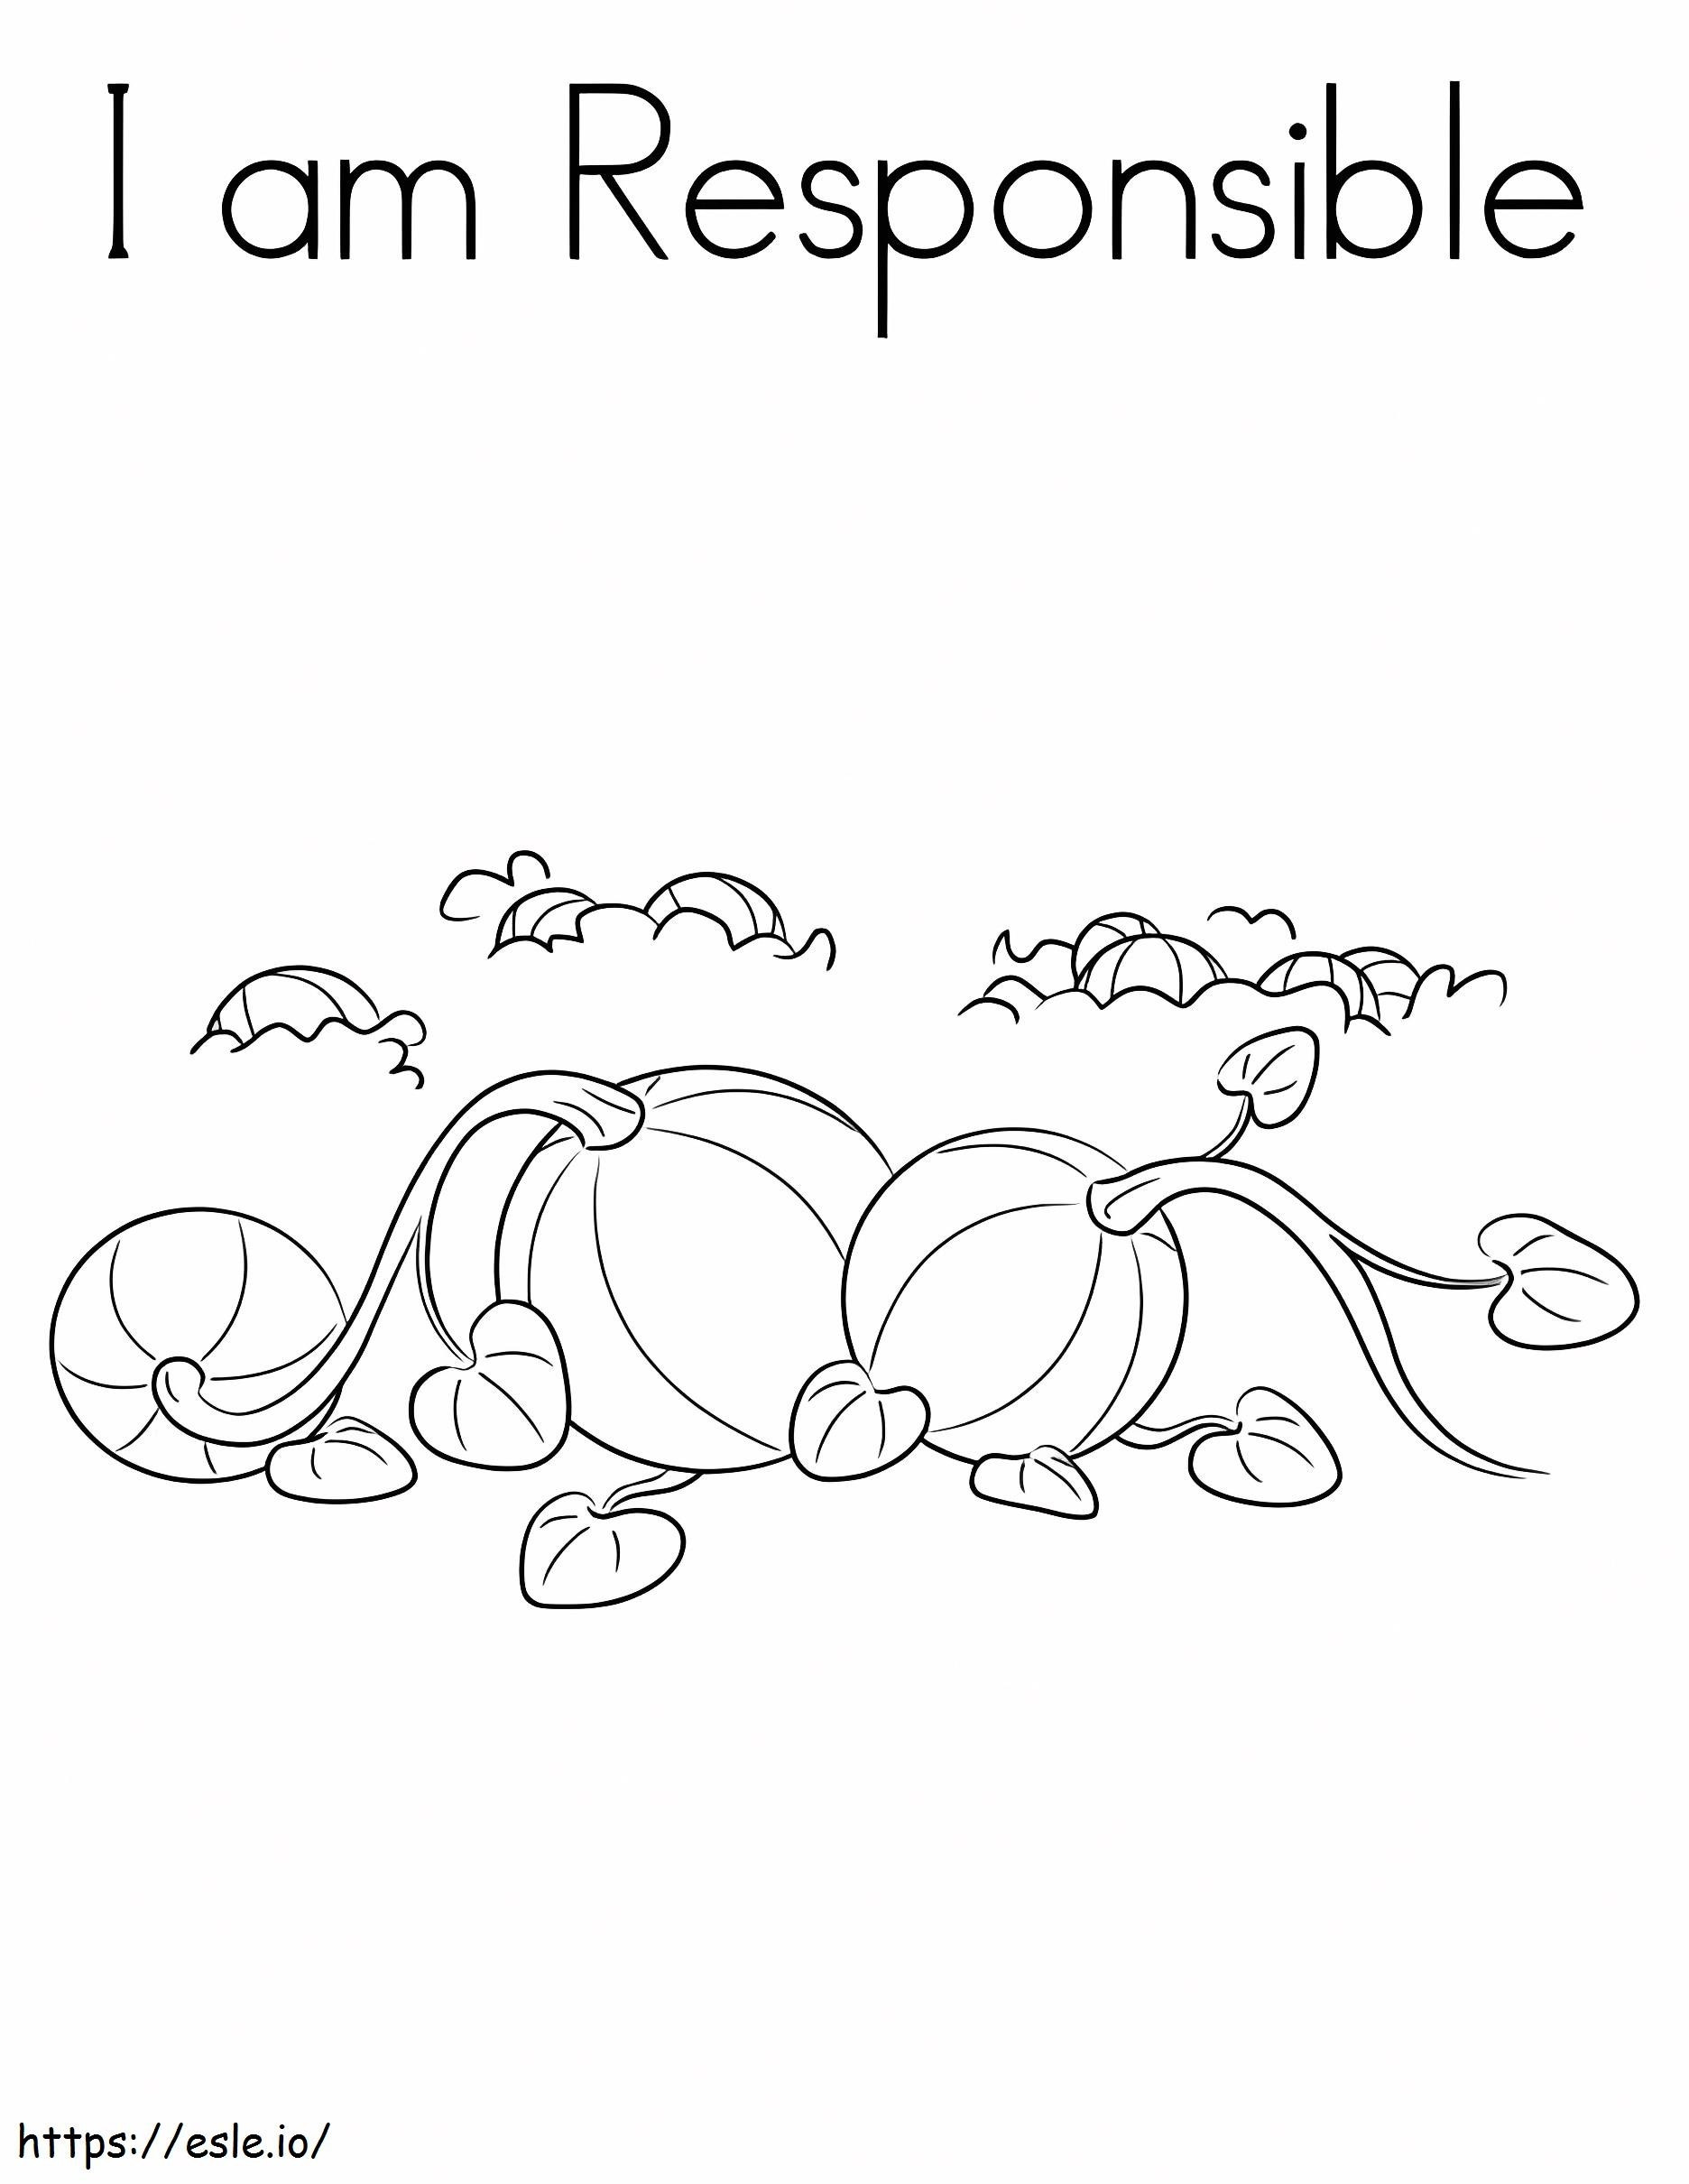 I Am Responsible 1 coloring page